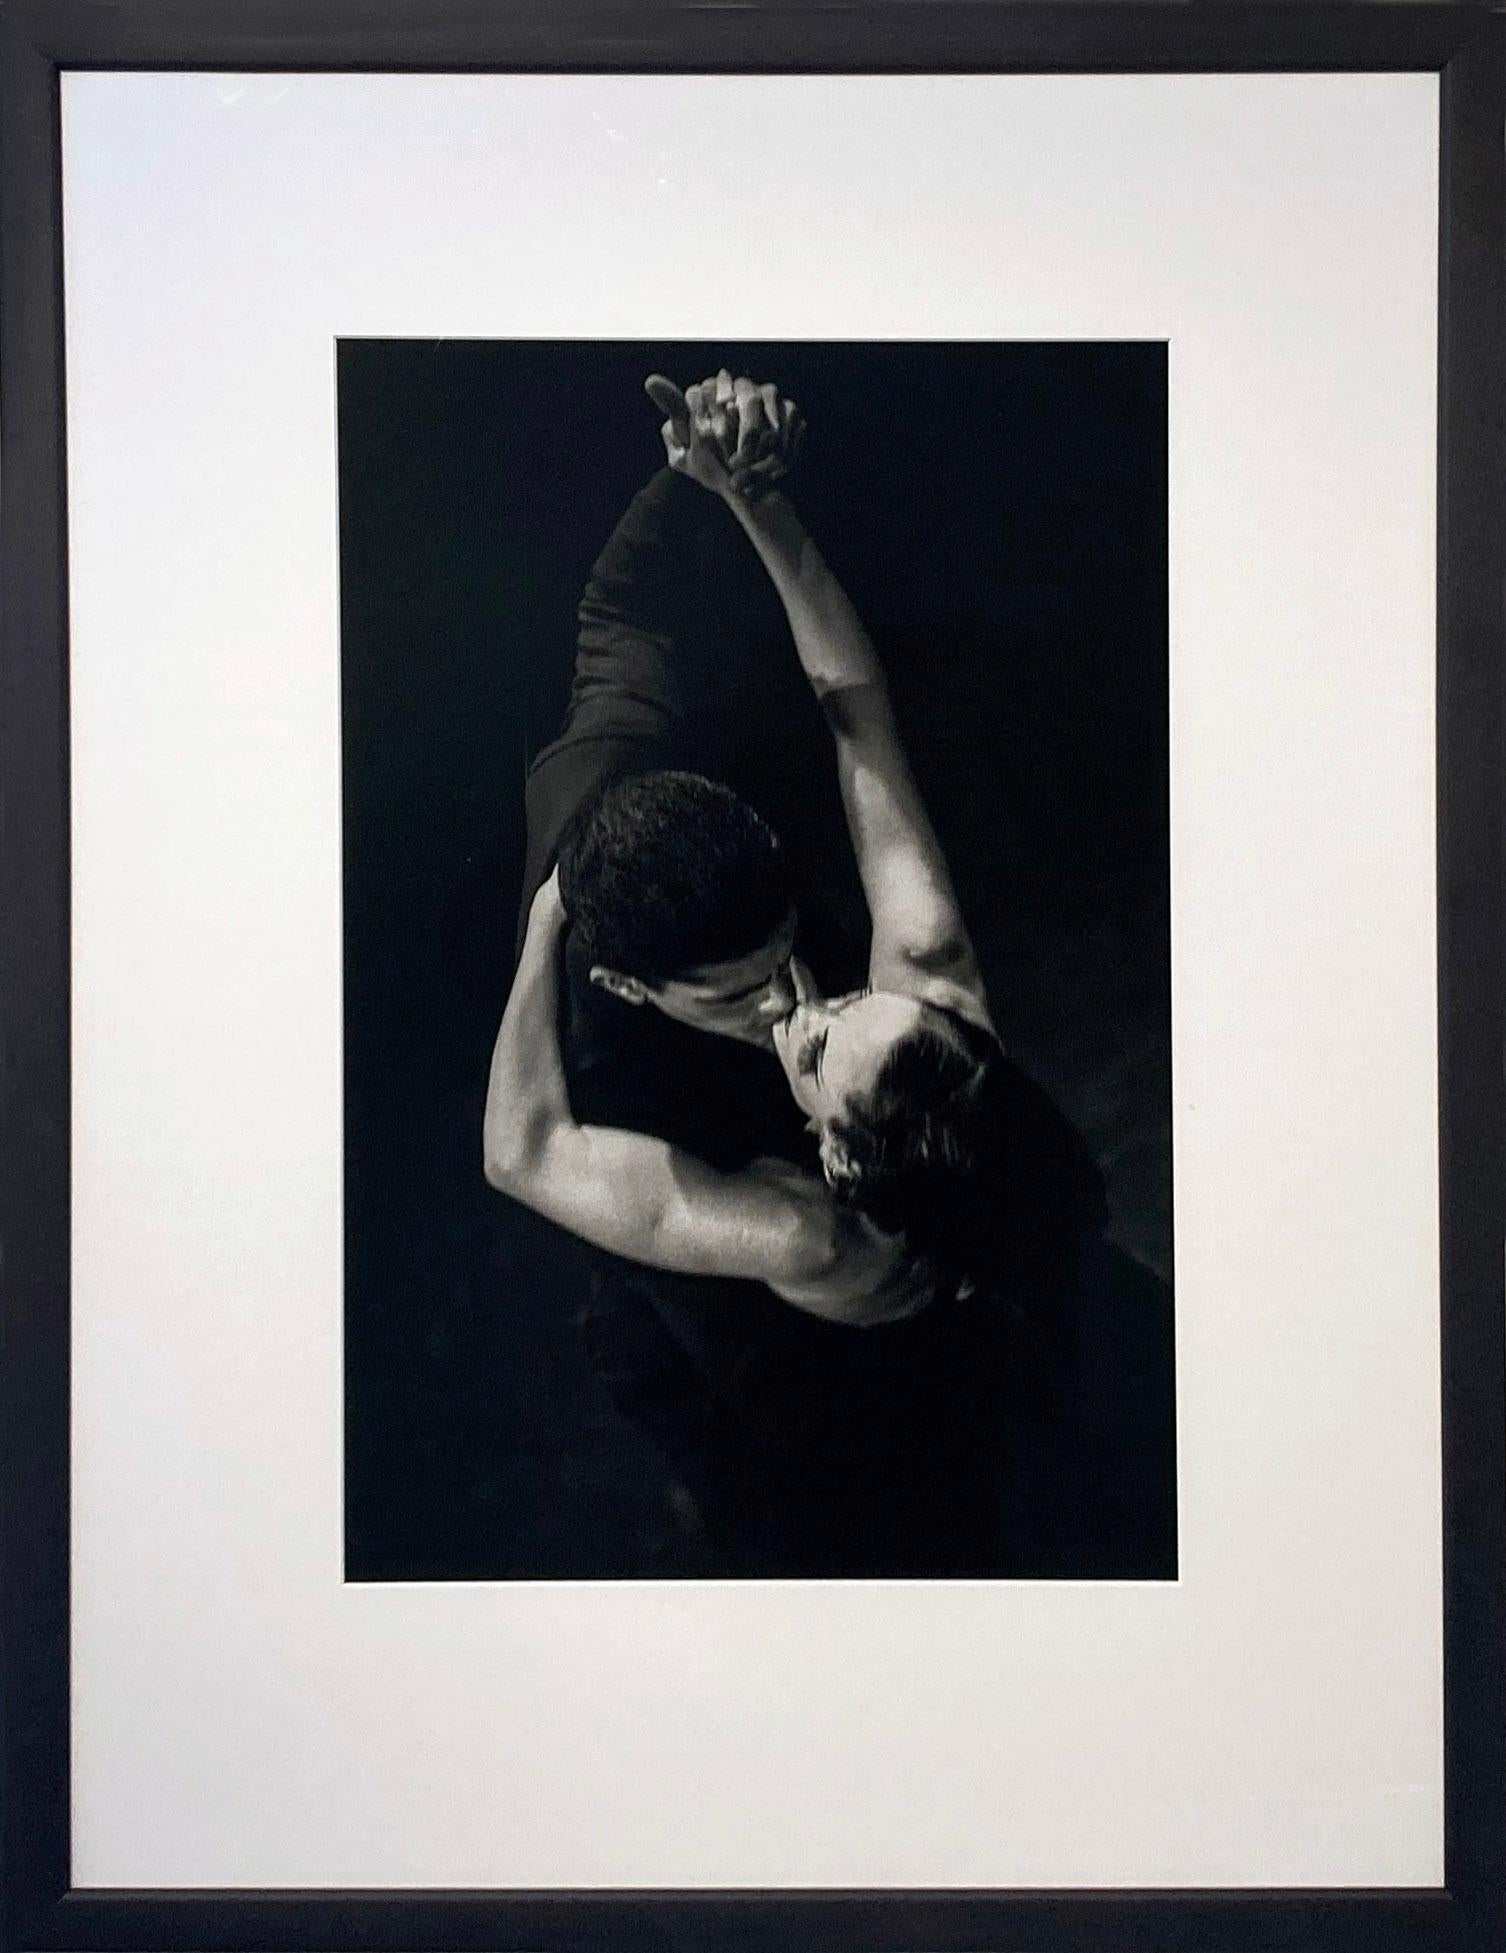 A fleeting touch of the lips on a tango dance floor.

James Sparshatt’s photographs of music and dance capture the emotion and intensity of people lost in the rhythm of the moment.
The work is available as silver gelatin and palladium platinum